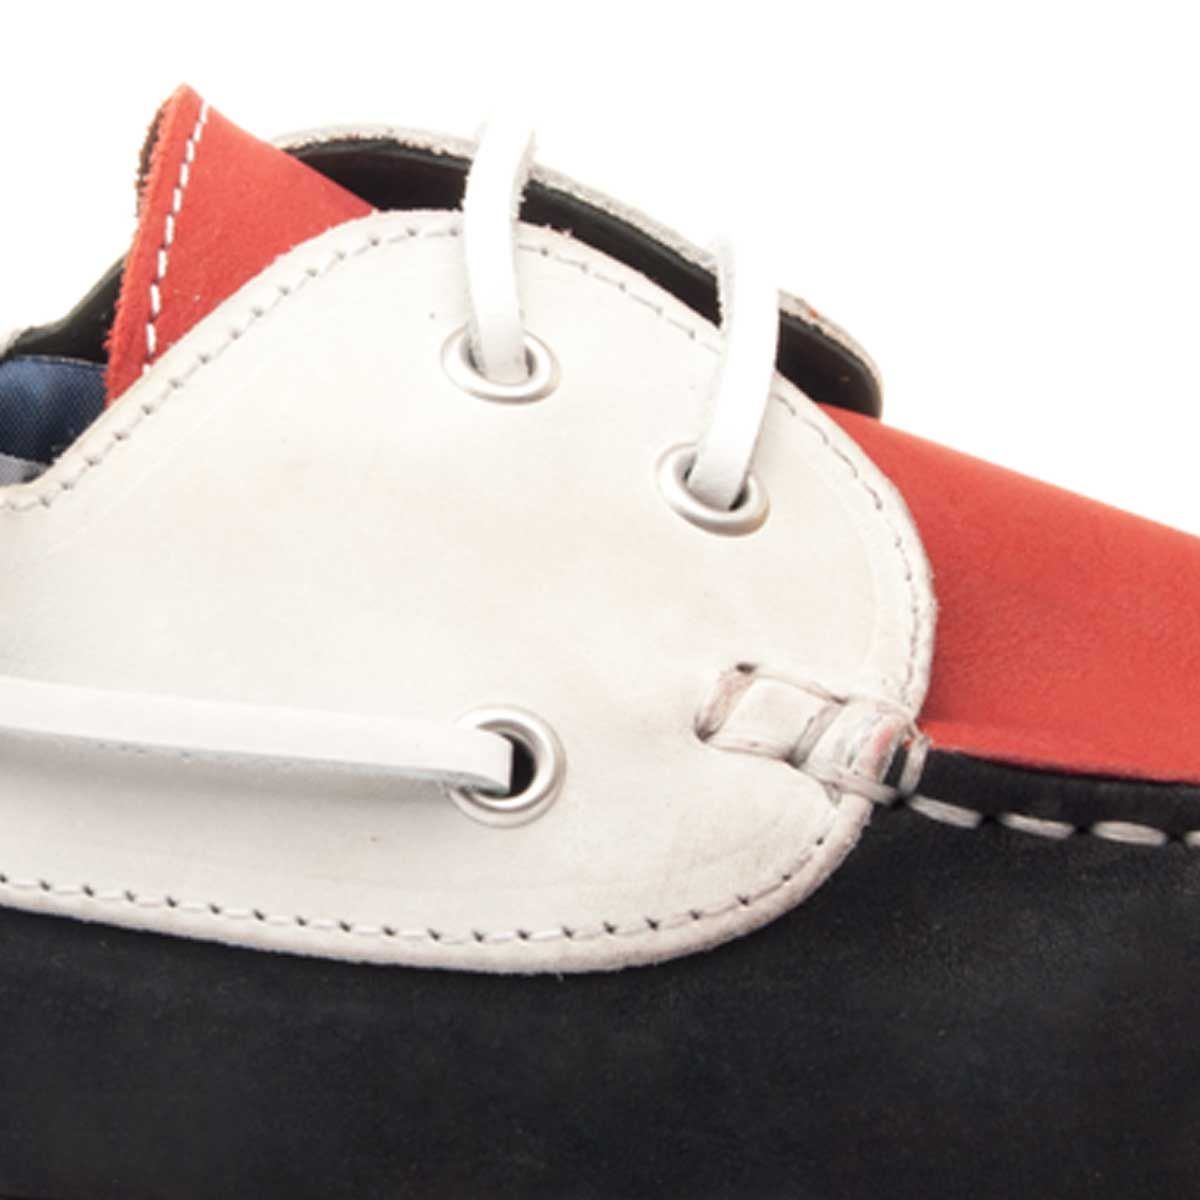 CAPSULA CAPSULA NAUTICA by Sachini. The idea of ​​this collection is that you get maximum comfort during the summer if you are one of those who like classics. We present this tricolor nautico with laces, made total sensing in first quality natural leather. Easy to clean and care. Anti-slip rubber floor and flexible, also has two colors, to give an original and special touch. Undoubtedly a shoe that can not be missing in your closet. Made in Spain.